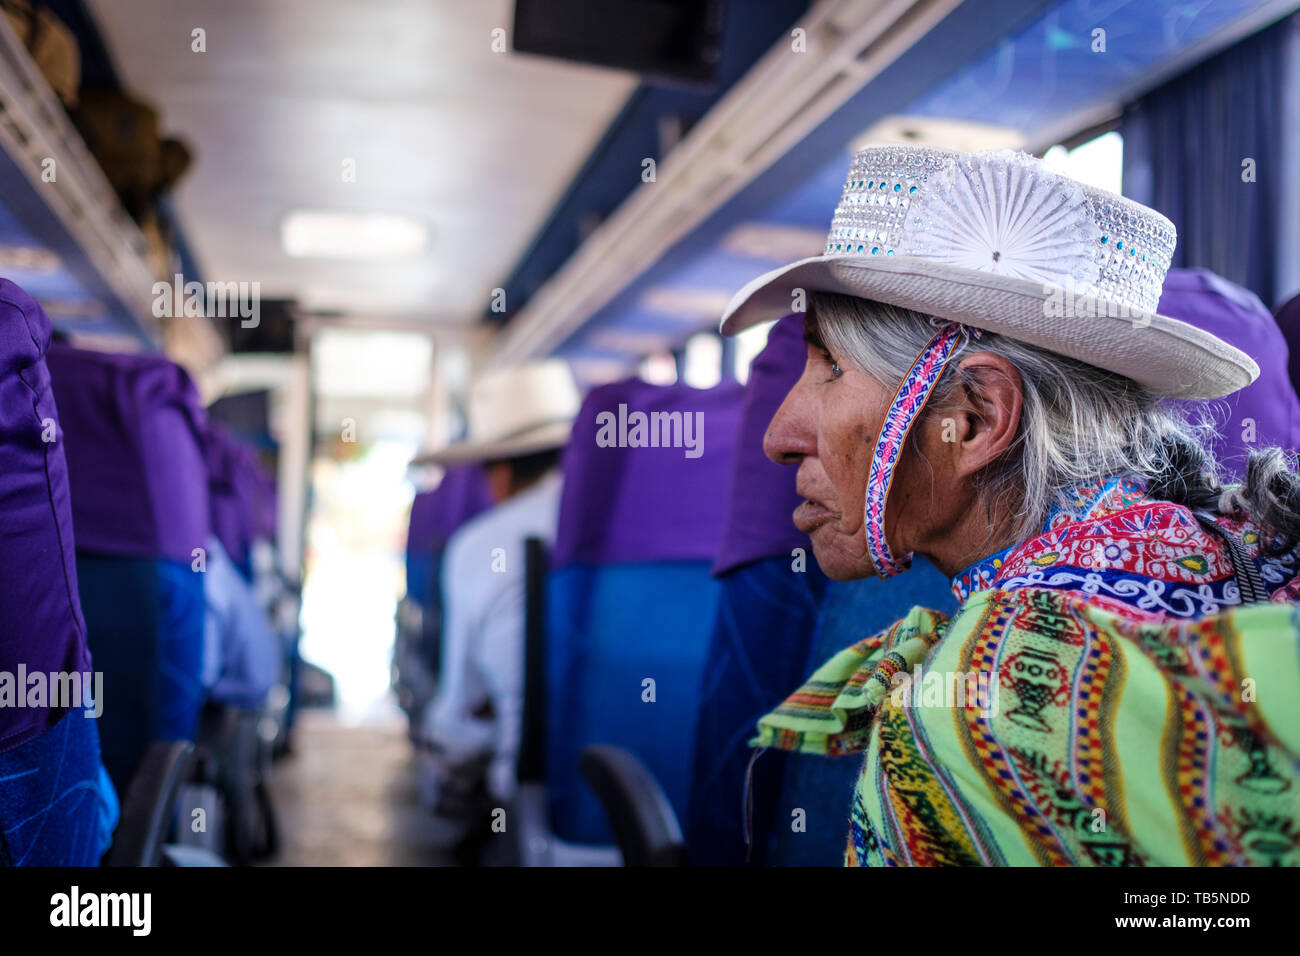 Elderly local woman sitting on the bus and wearing a fancy traditional hat in Chivay, Arequipa Region, Peru Stock Photo